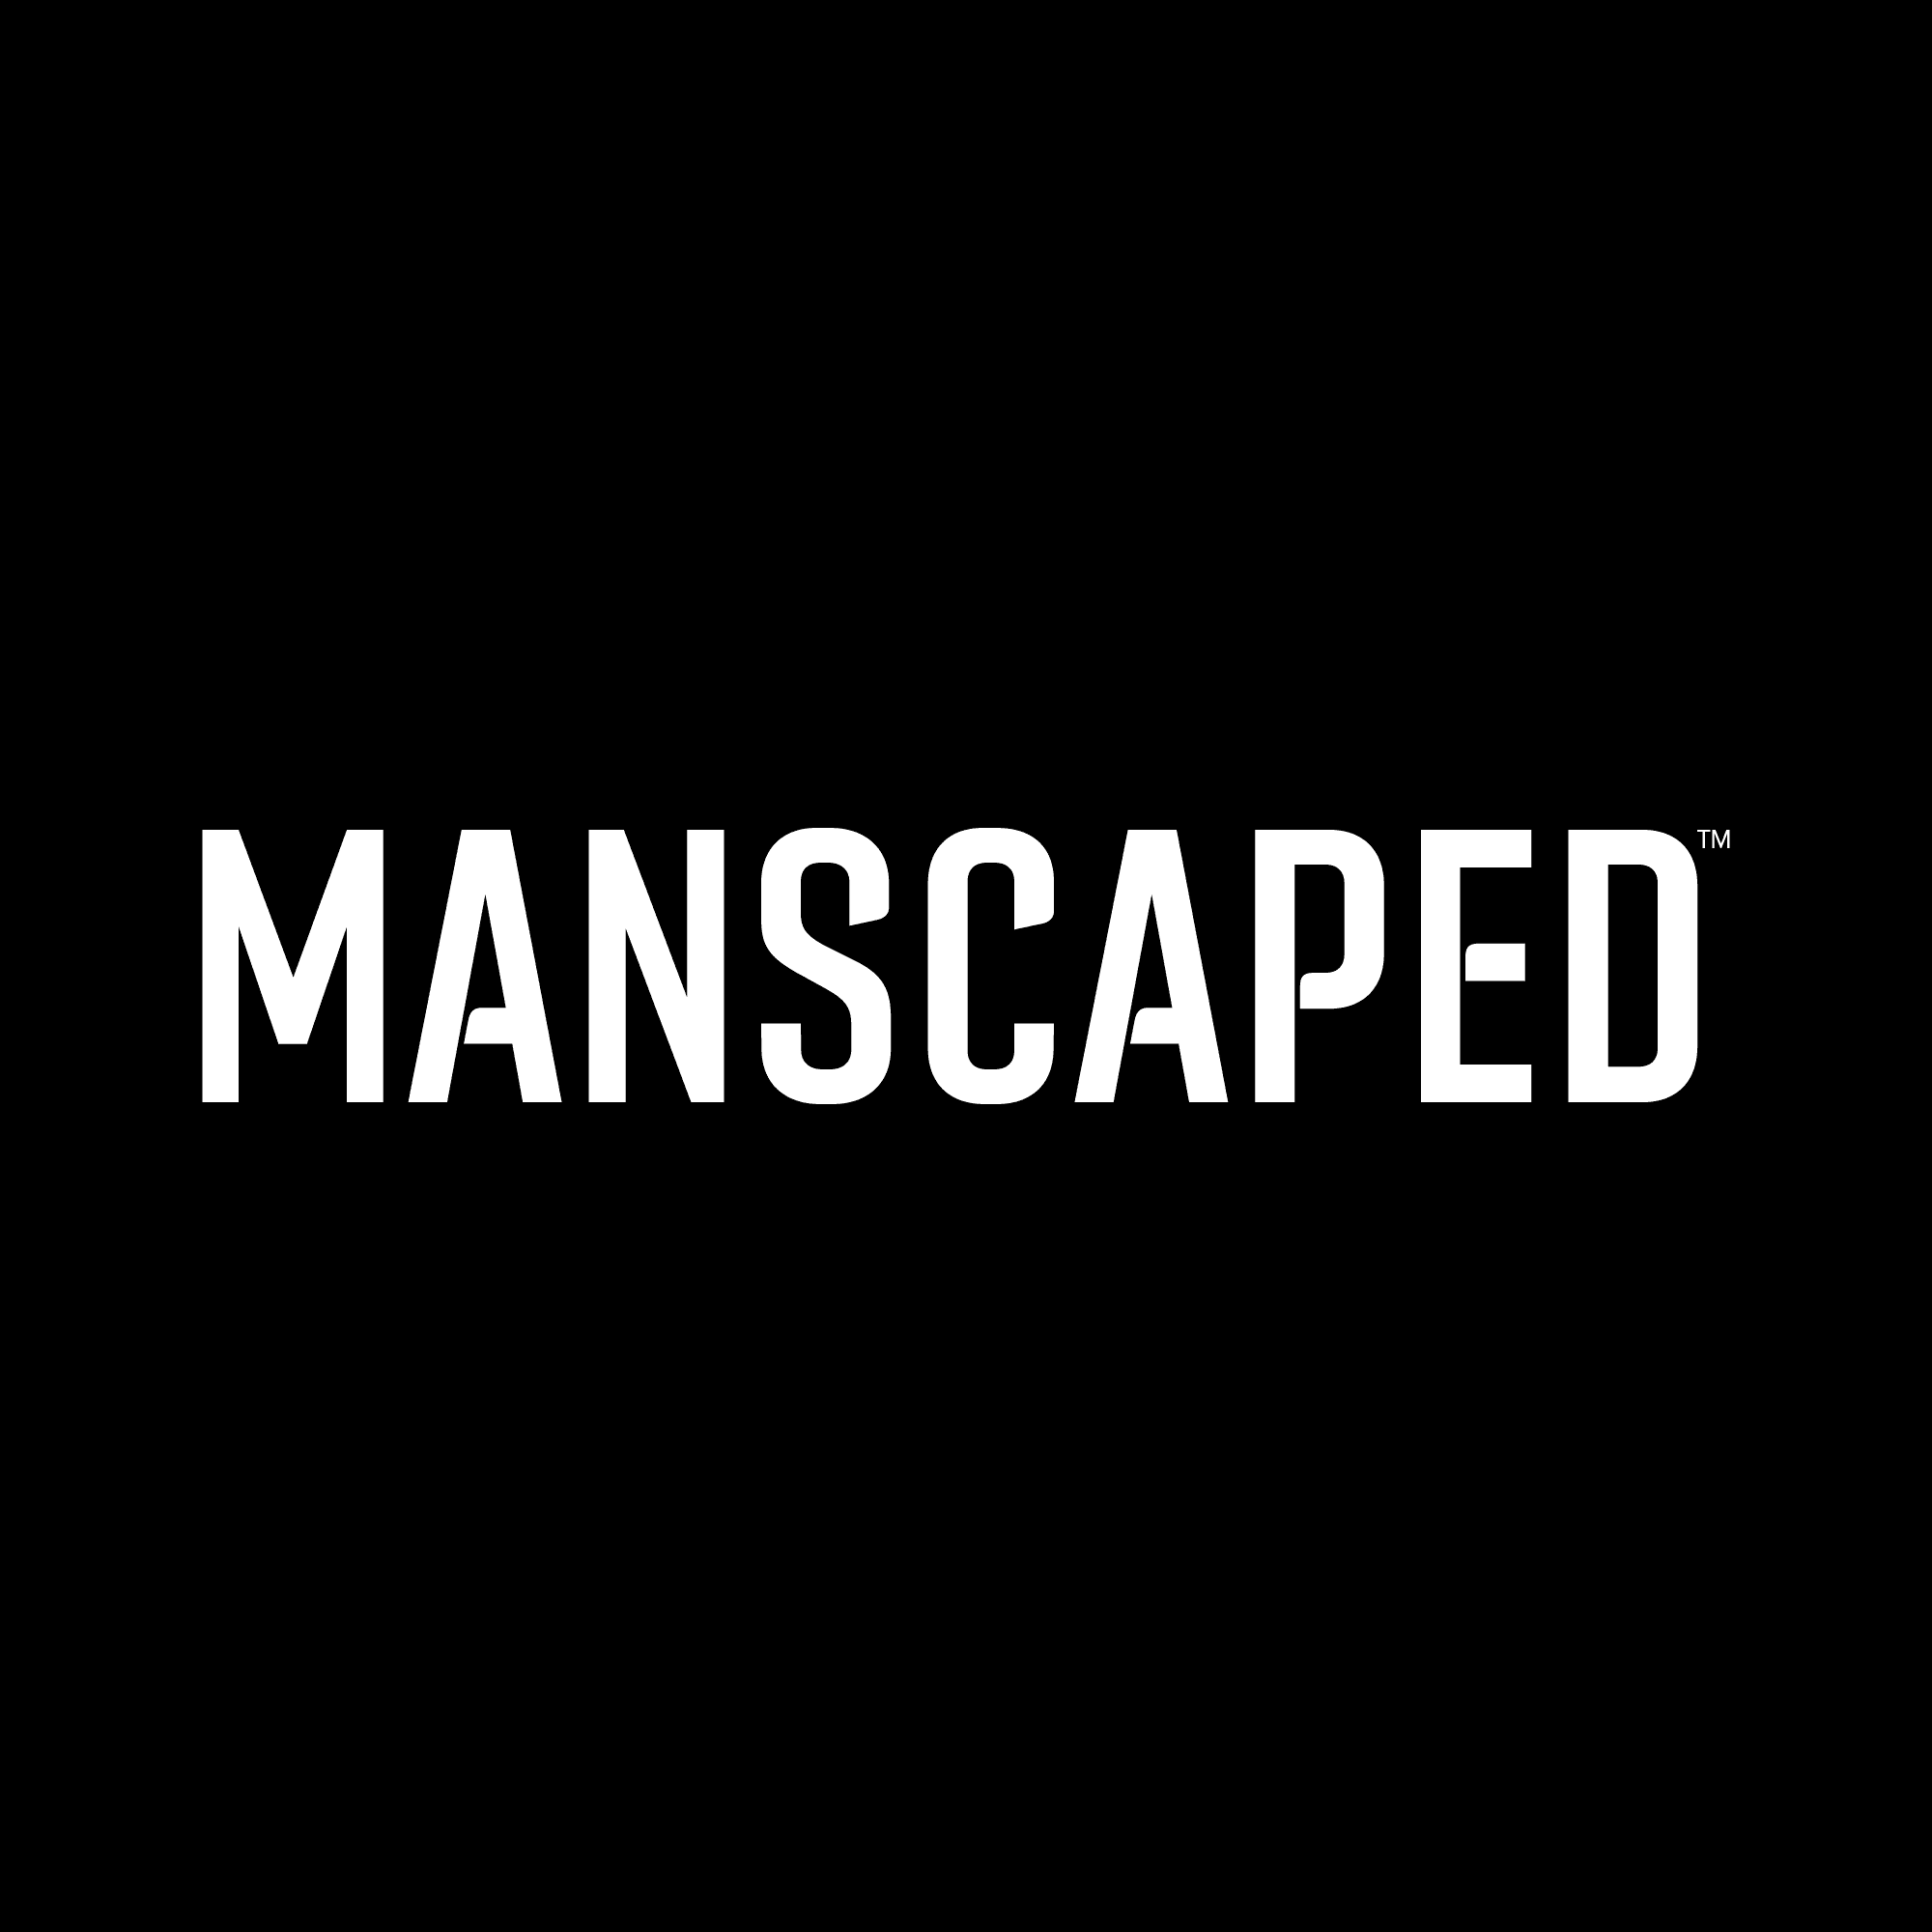 MANSCAPED™, a Leading Men’s Lifestyle and Consumer Brand, to Become a Publicly Traded Company via Business Combination With Bright Lights Acquisition Corp.